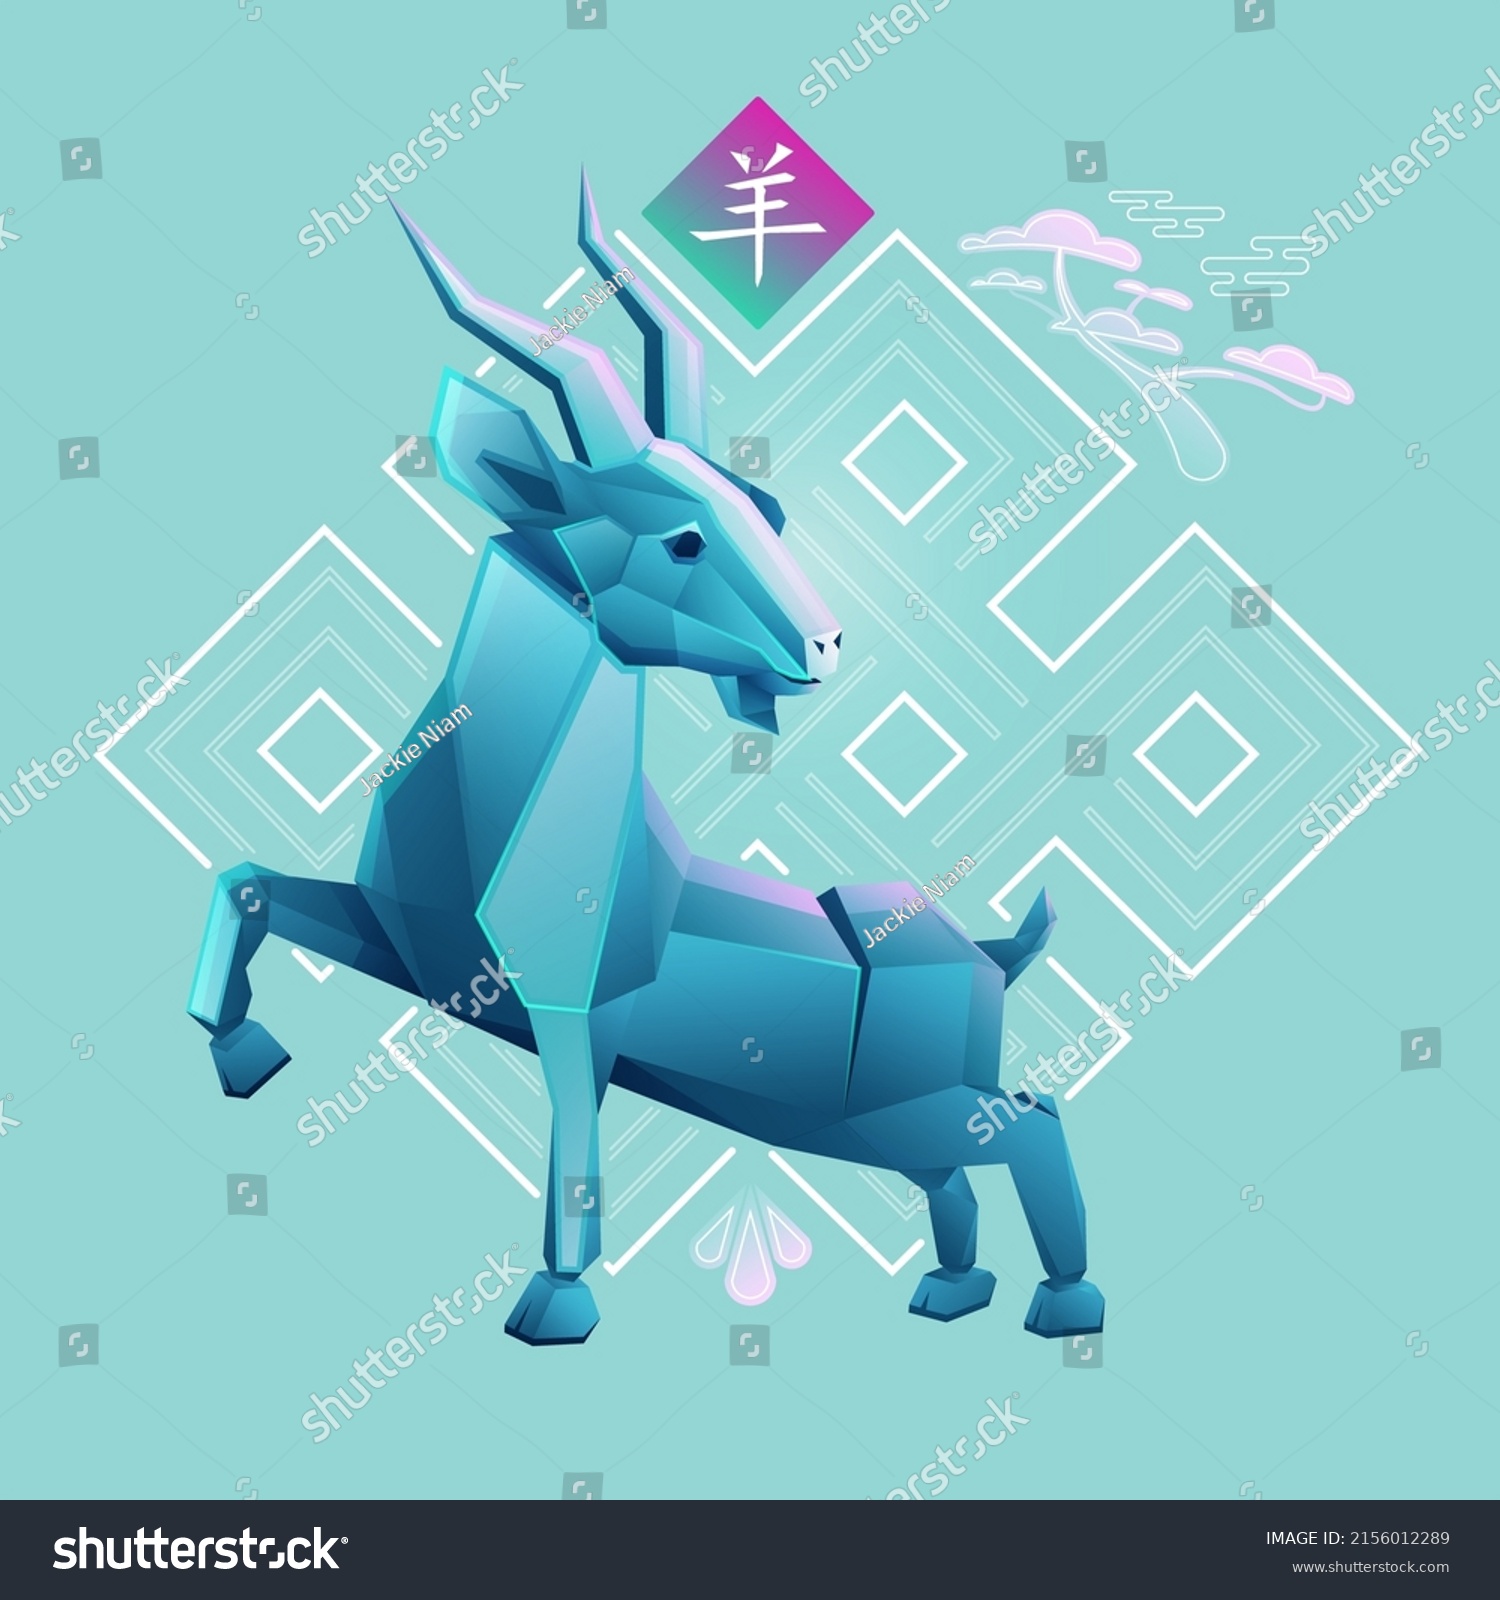 SVG of Chinese zodiac sign of goat, Graphic of colorful low poly goat with traditional Chinese element,Chinese word refers to Goat Zodiac svg